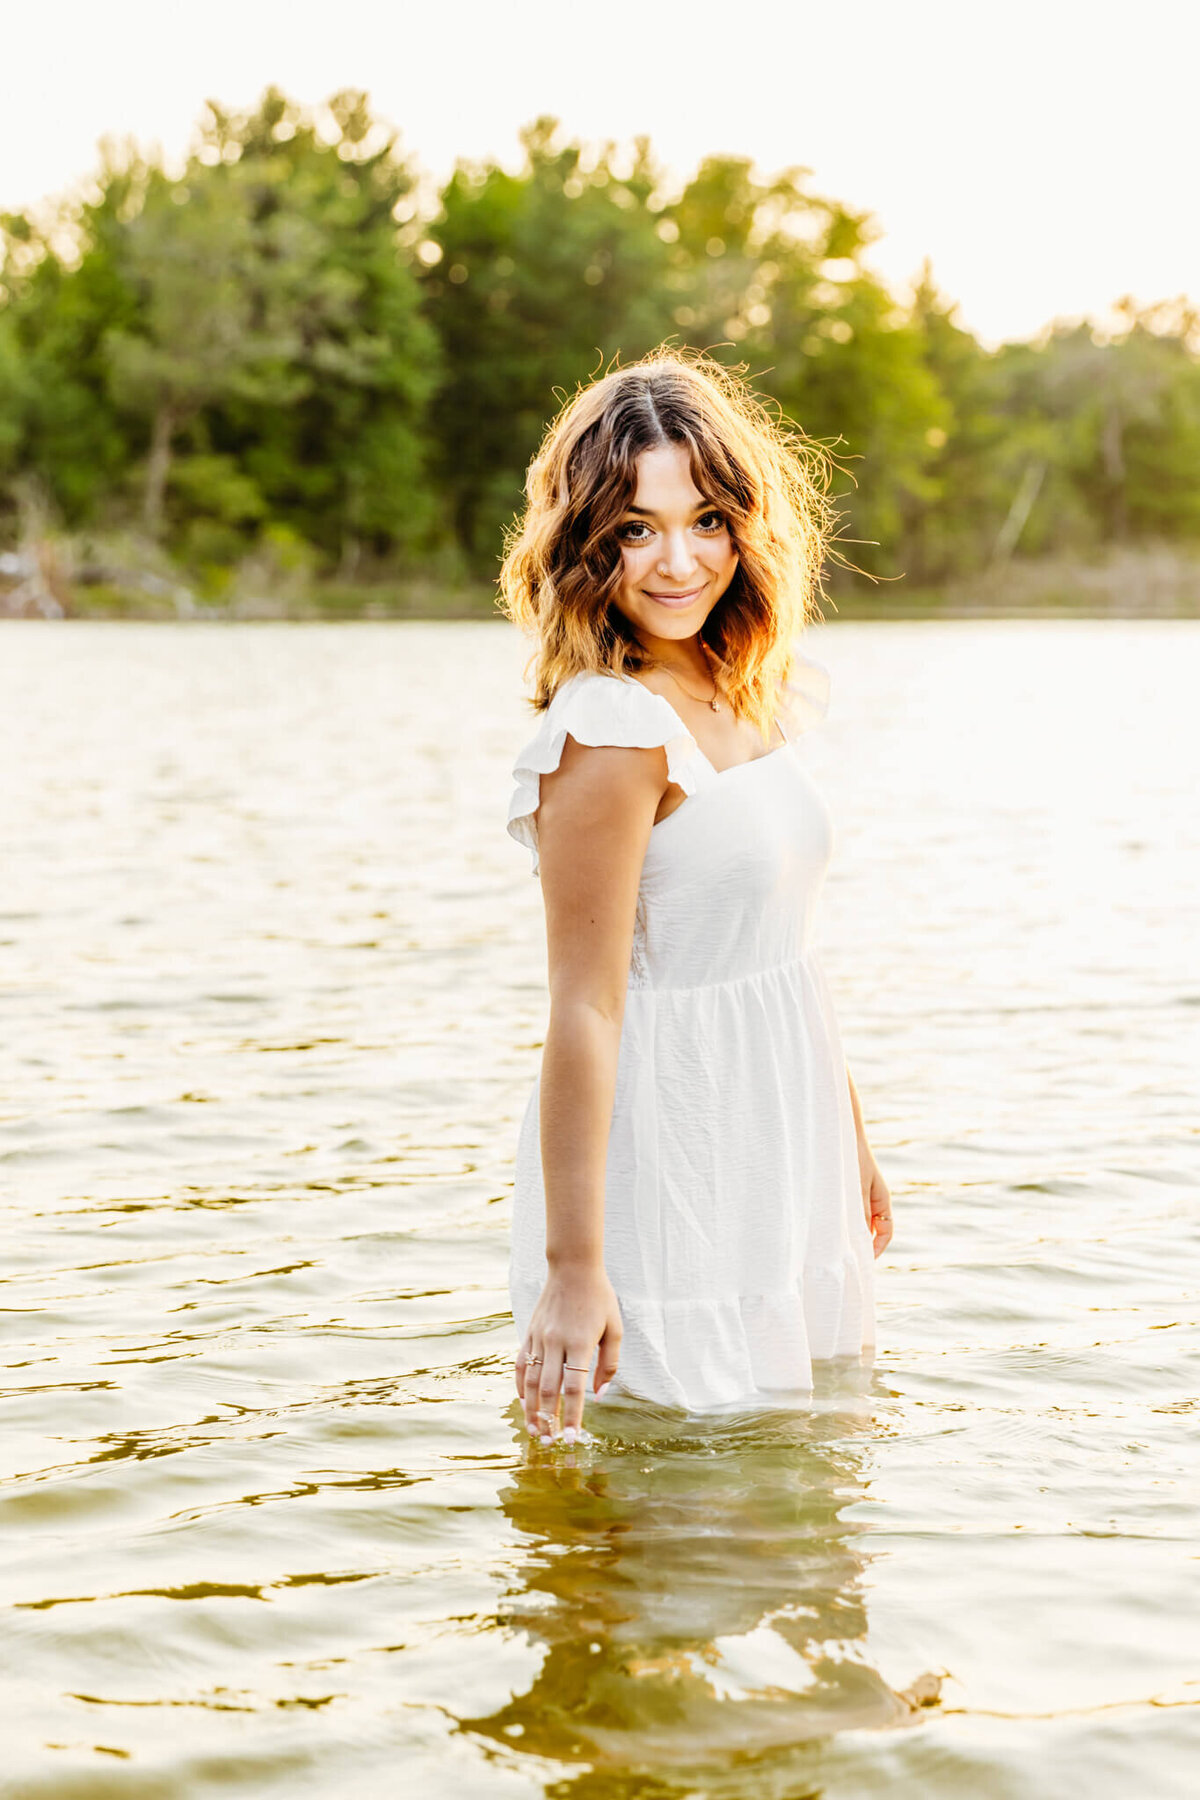 beautiful image of a teen girl in a white dress walking in water and running her fingers across the top.